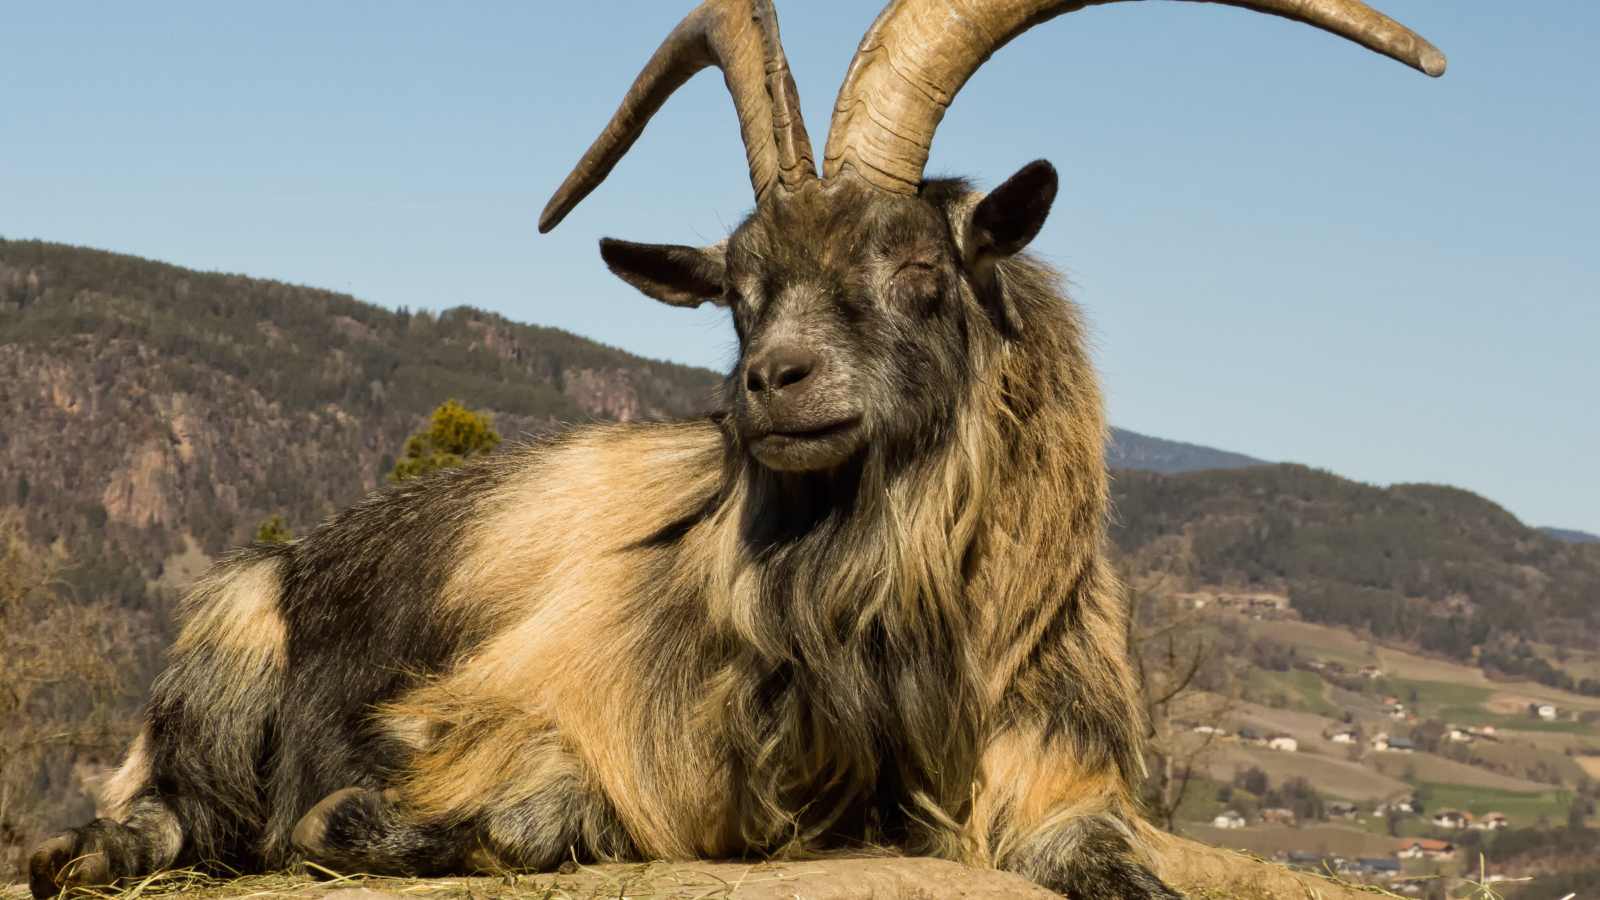 A majestic male goat buck with long curved horns. He has long light brown and black hair.